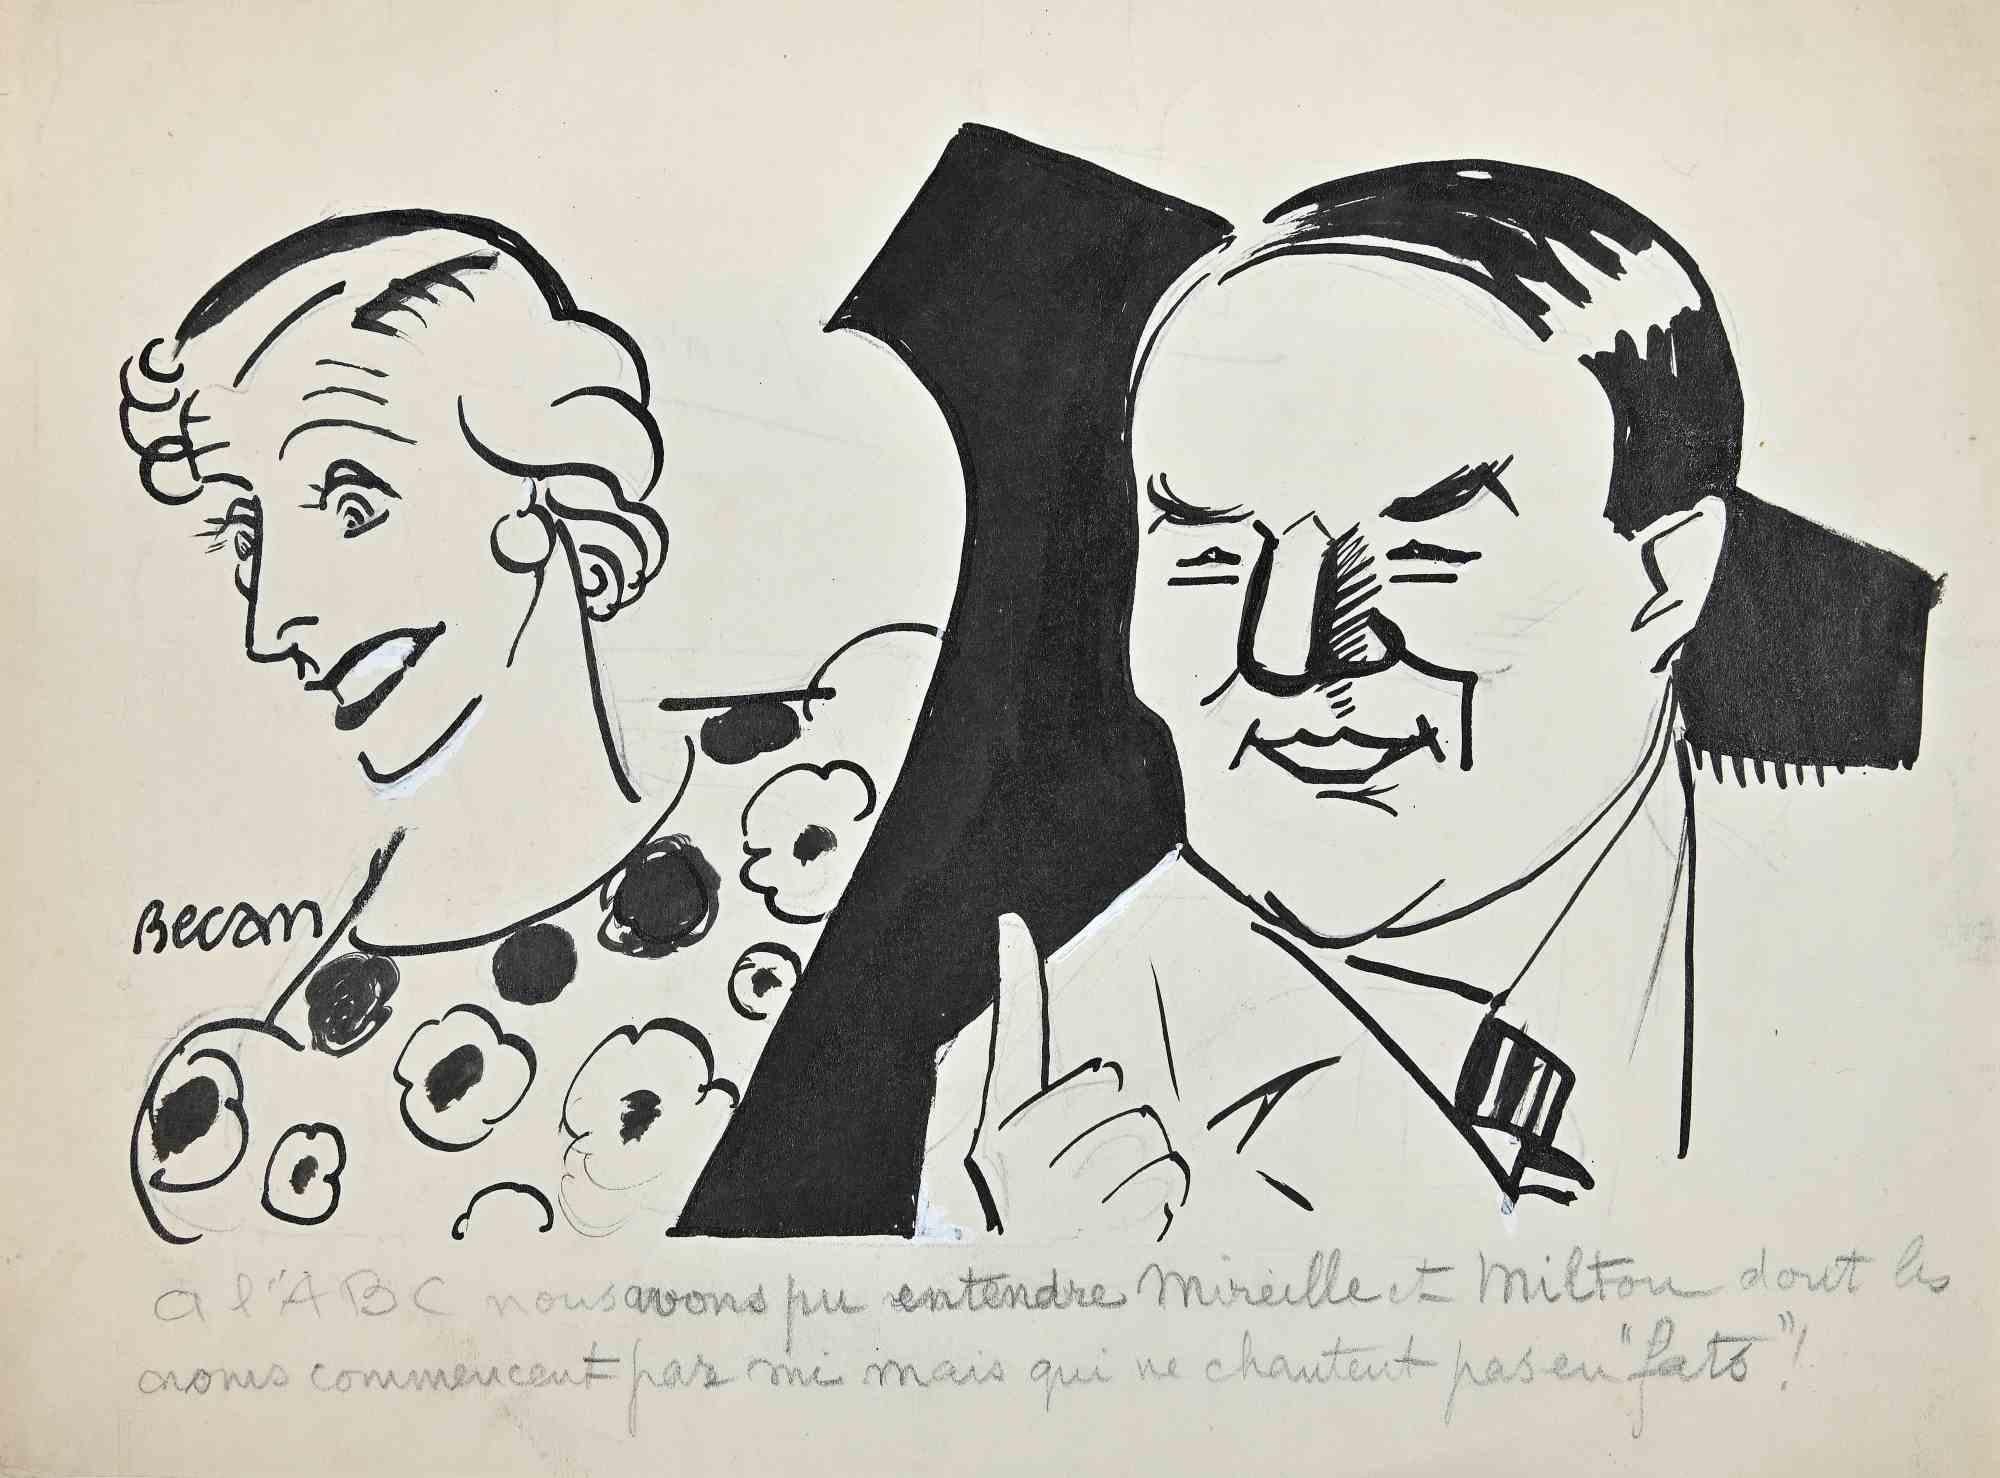 Sketch is an Original Black Marker Drawing realized by Bernard Becan in the Mid-20 Century.

The little artwork is in good condition except for being aged.

The artwork is depicted with soft strokes.